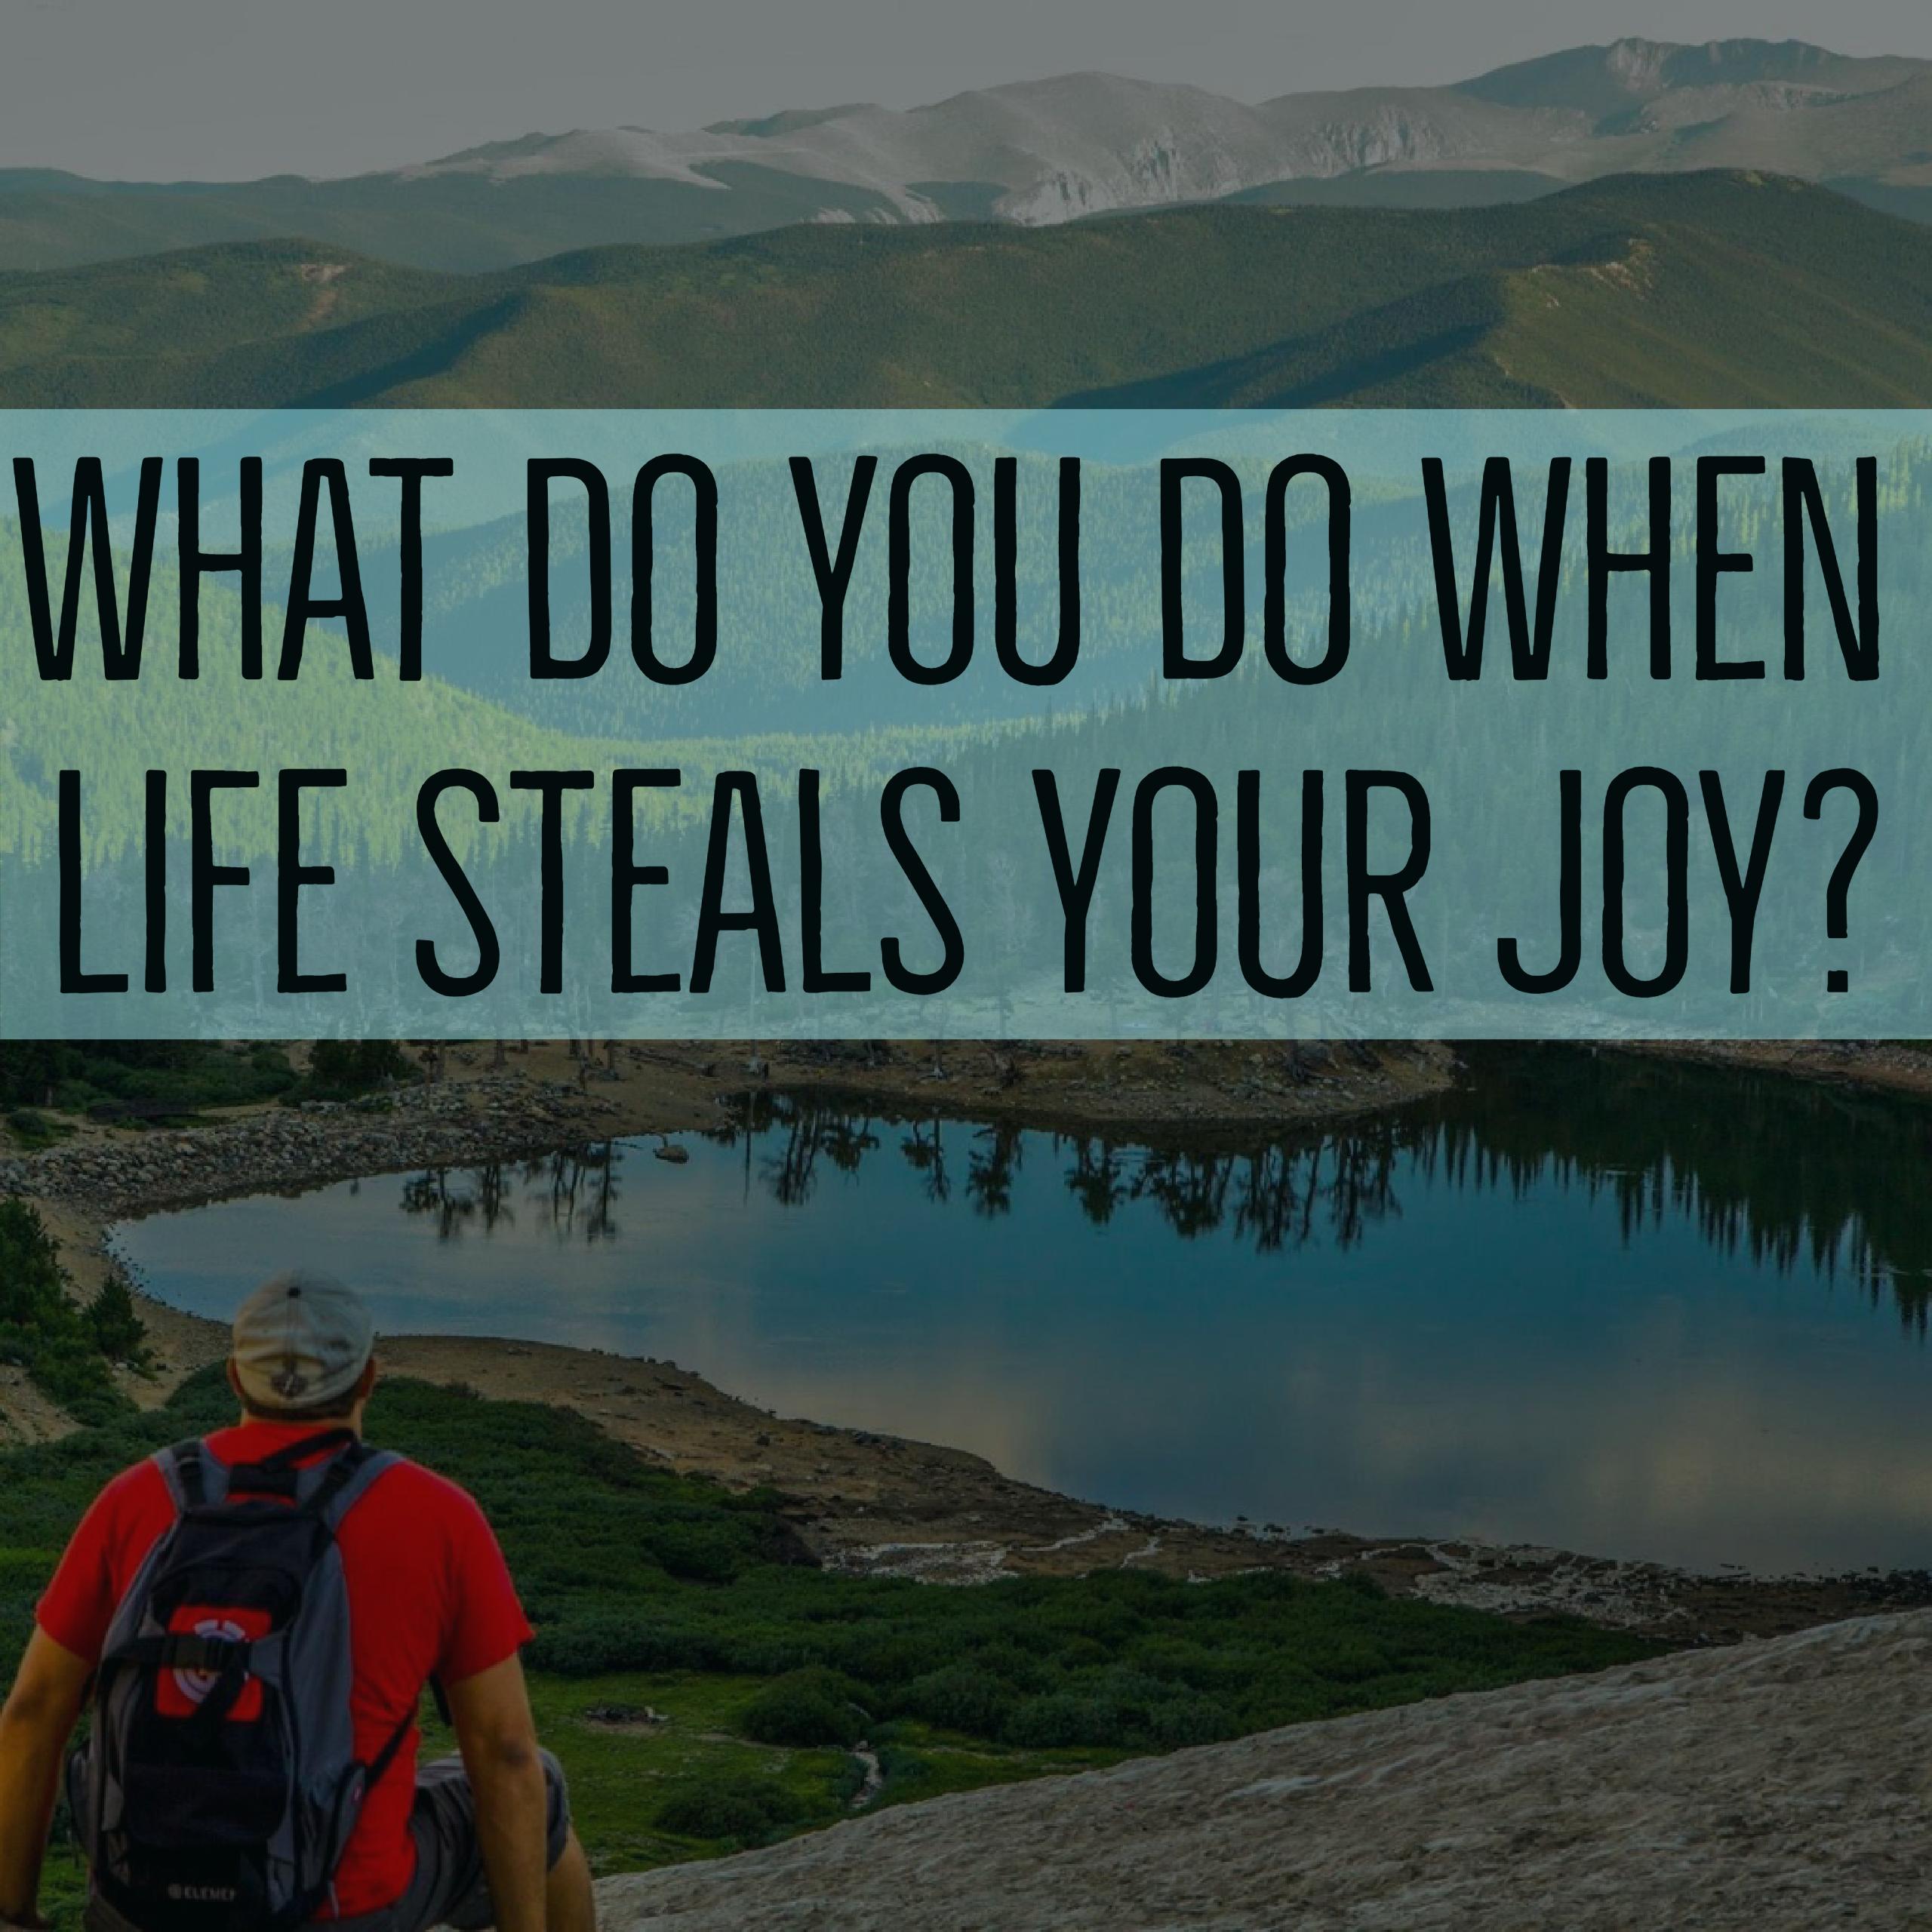 When Life Steals Your Joy